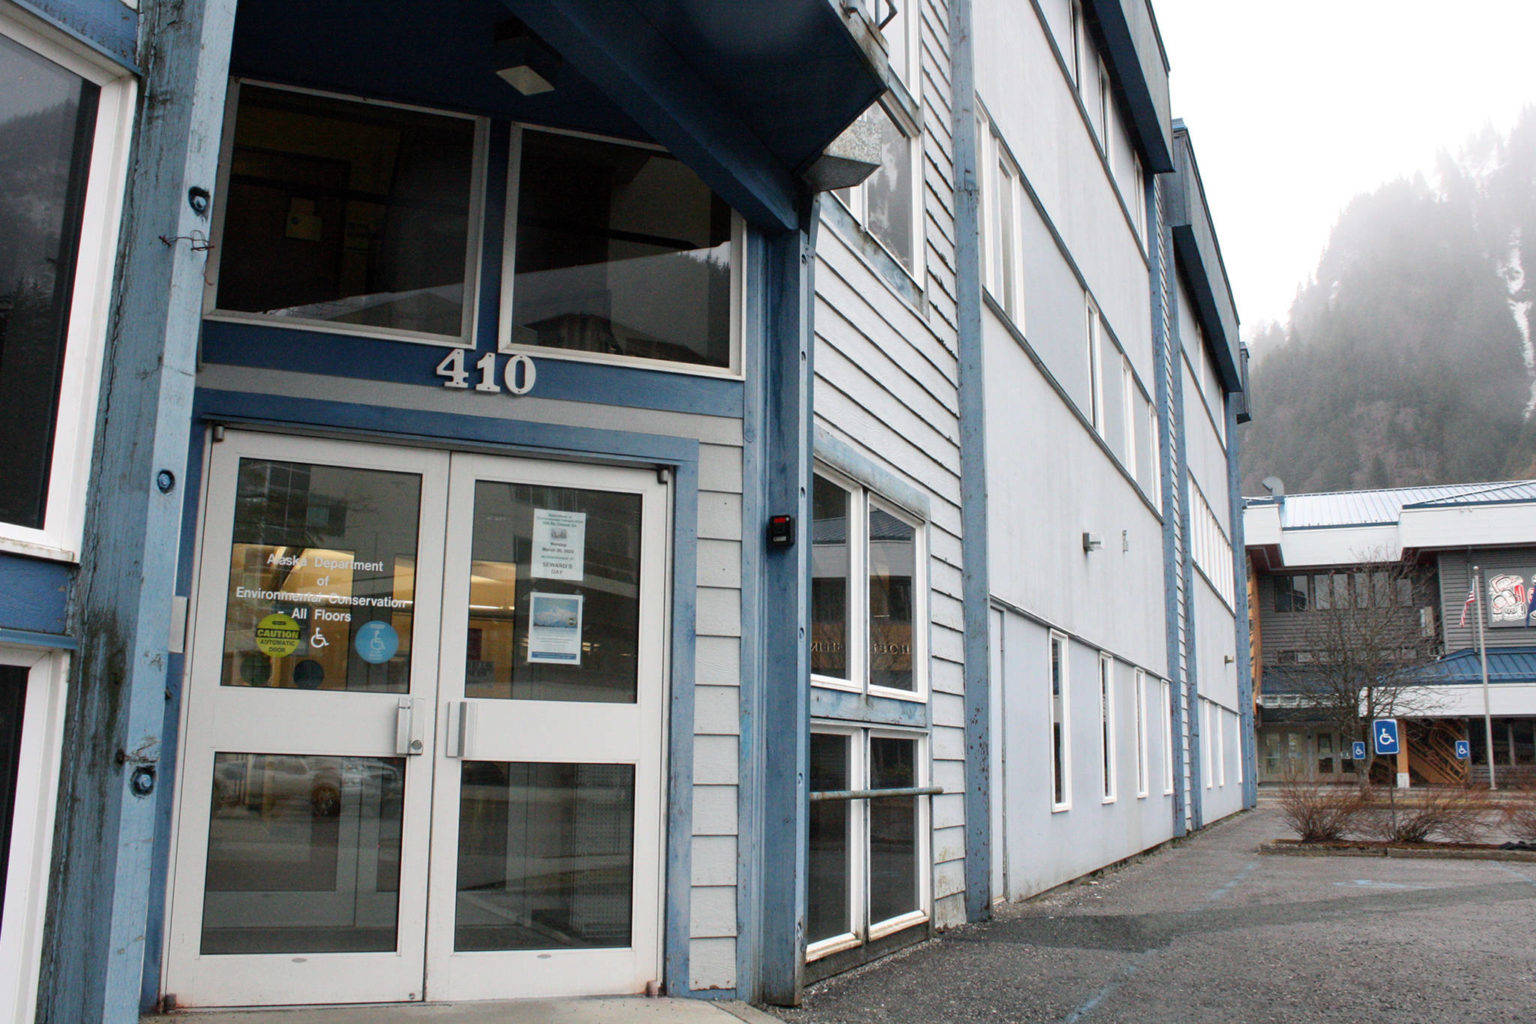 Ben Hohenstatt | Juneau Empire                                A patient, who tested positive for the coronavirus, had contact with the first floor of the state office building at 410 Willoughby Ave., according to an email from DEC Commissioner Jason Brune.